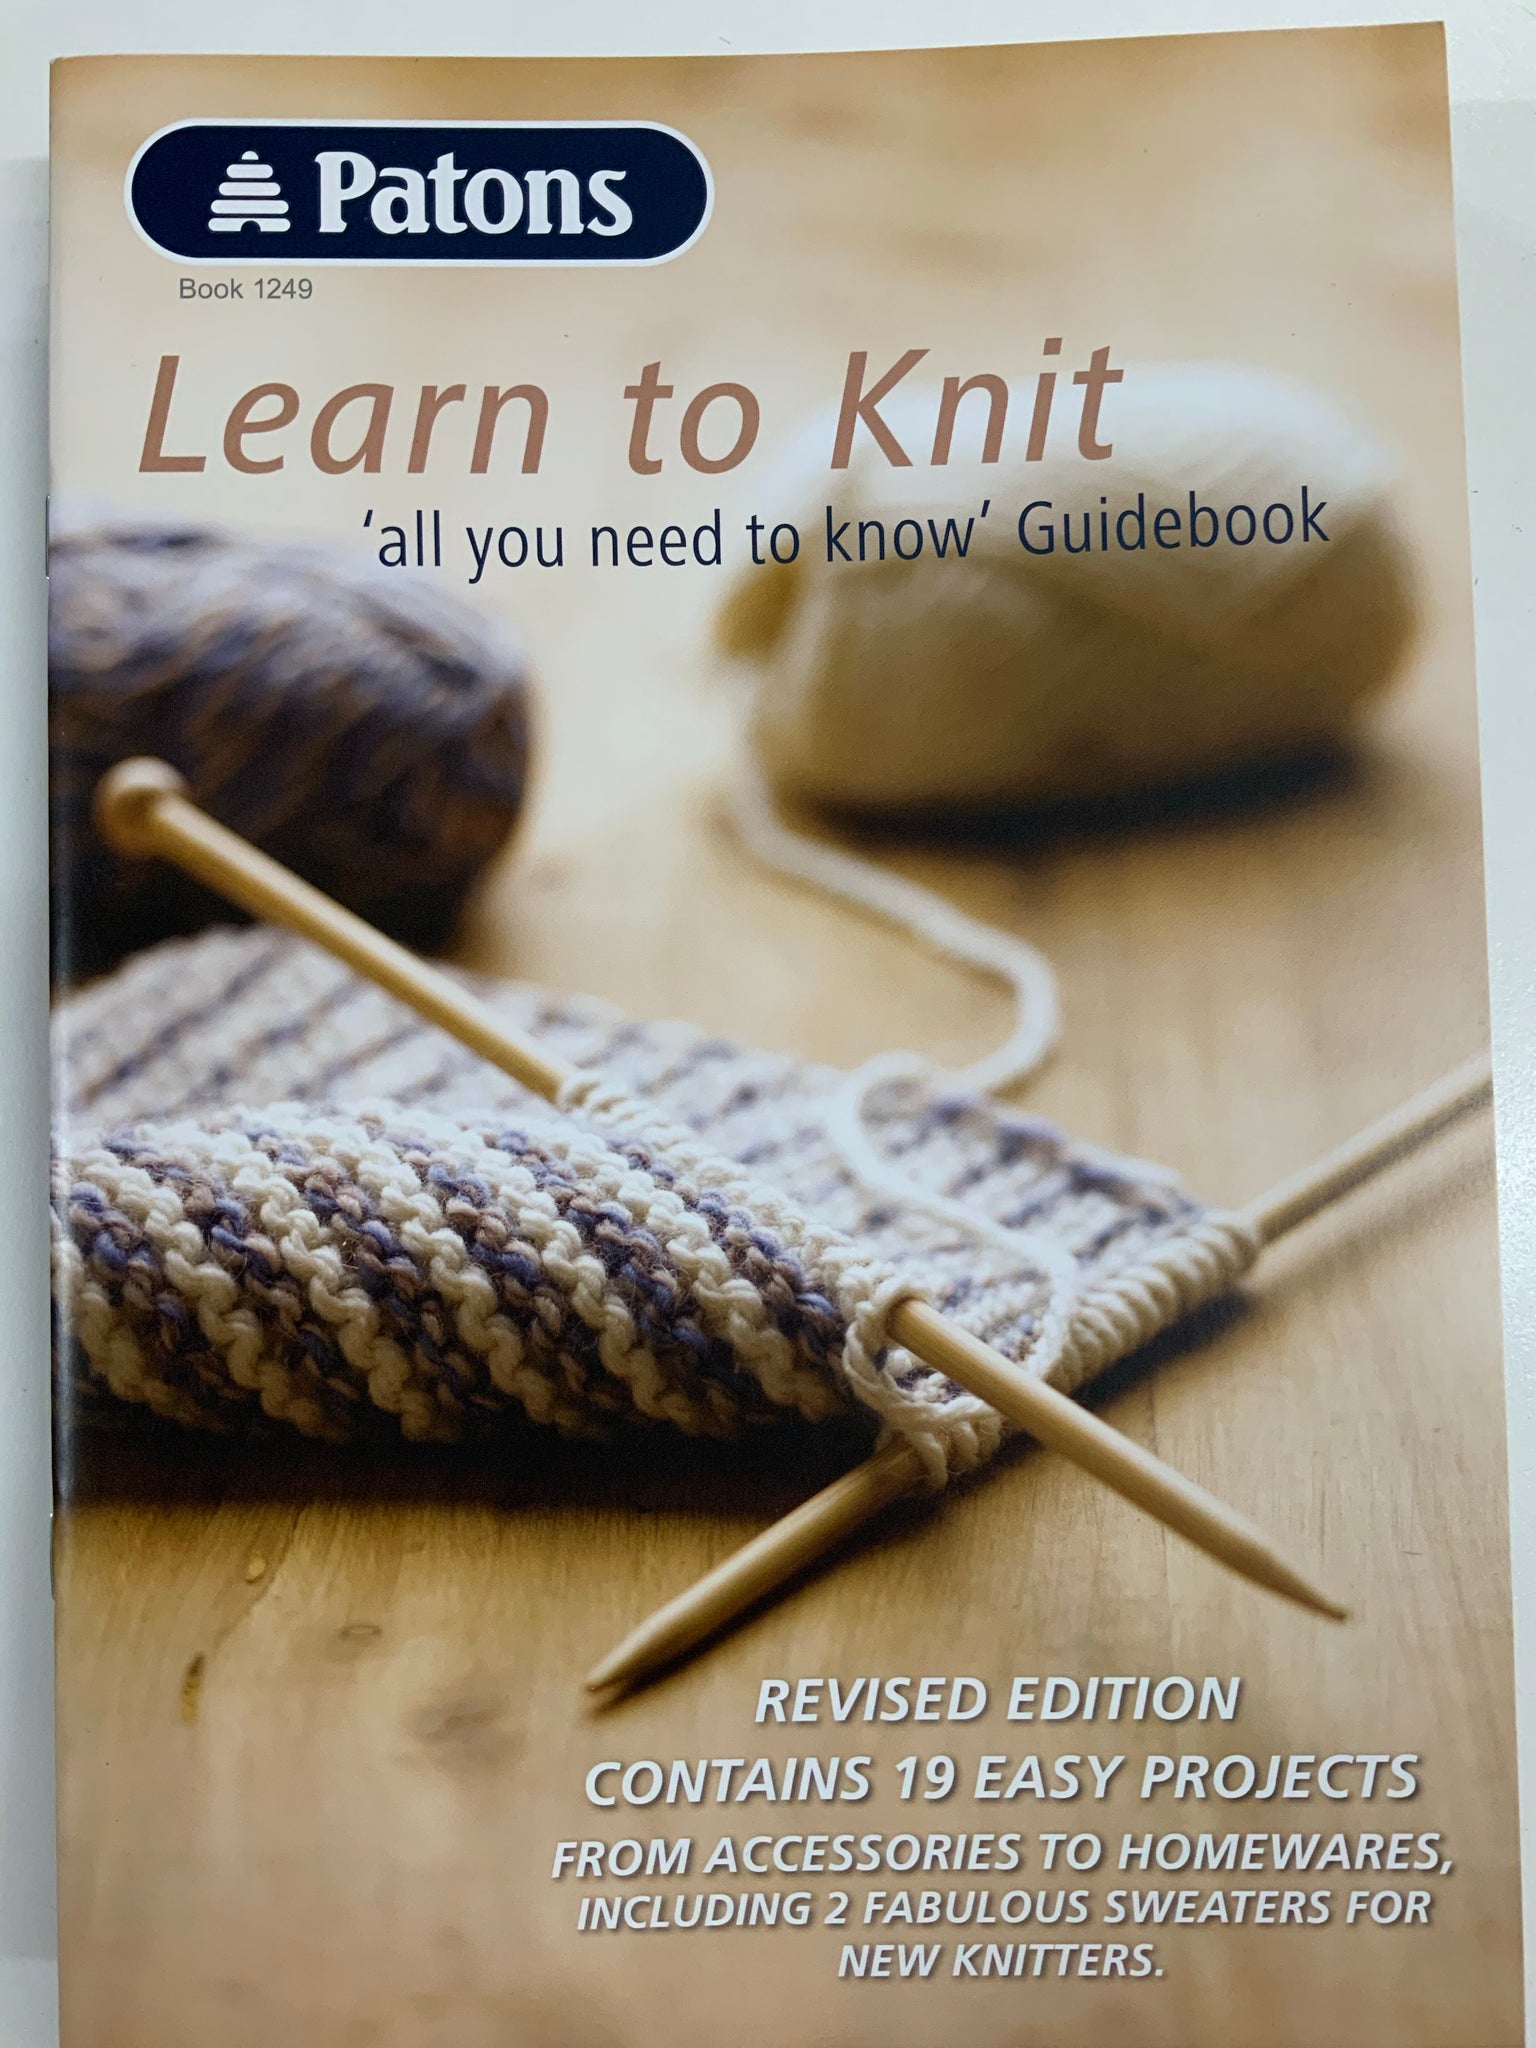 Book 1249 Learn To Knit